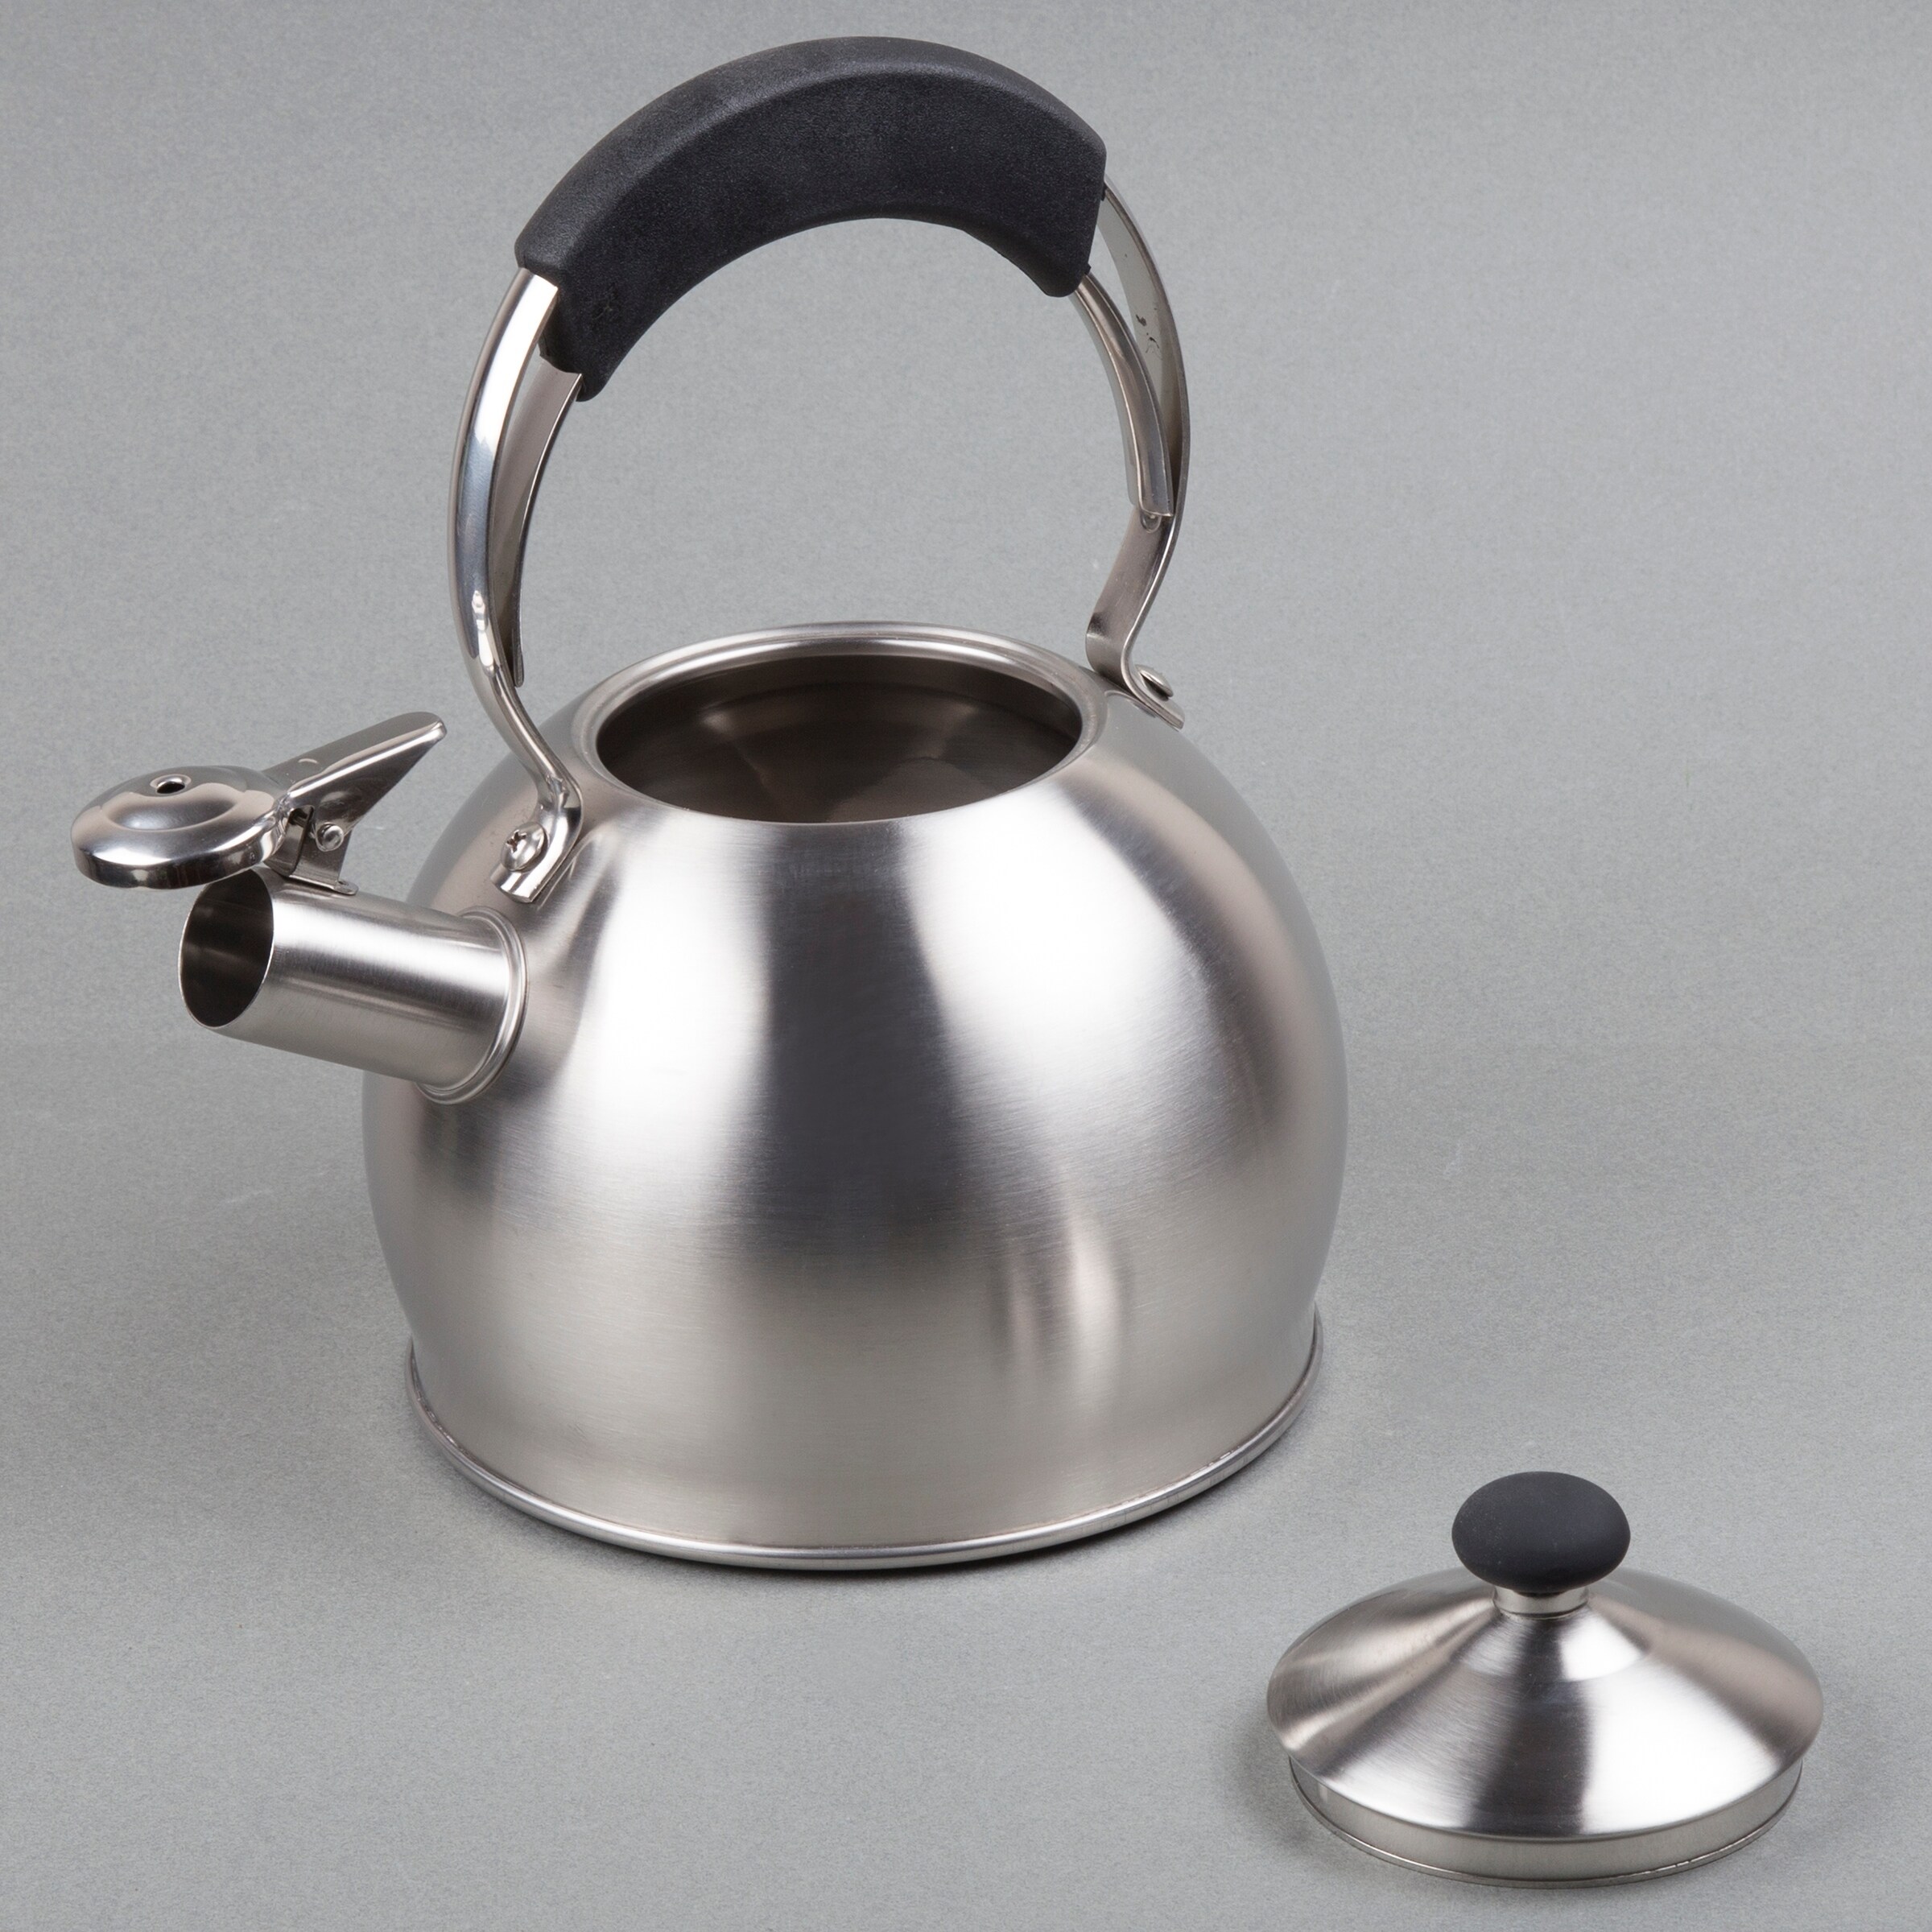 https://ak1.ostkcdn.com/images/products/10666509/Creative-Home-Galaxy-2.6-Qt-Whistling-Stainless-Steel-Tea-Kettle-79a00033-27f7-4d73-9407-8970f07a31ca.jpg